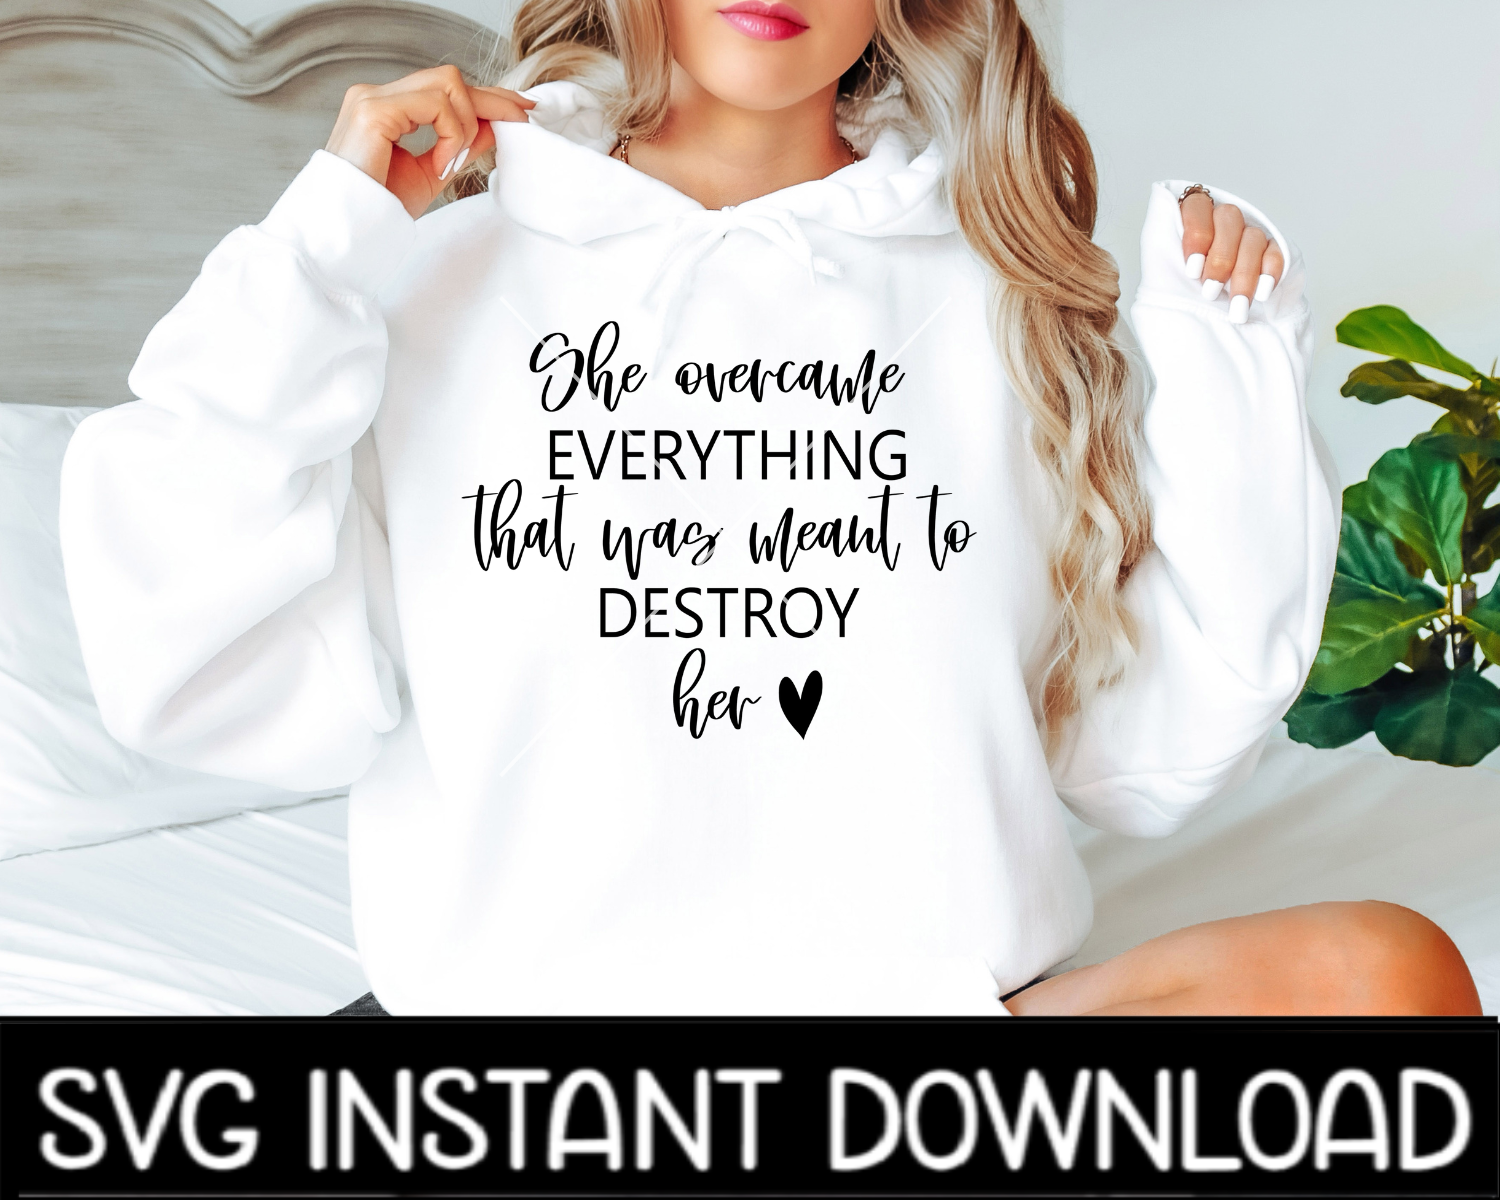 She Overcame Everything That Was Meant To Destroy Her SVG, Inspirational SVG, Instant Download, Cricut Cut Files, Silhouette Cut File, Print